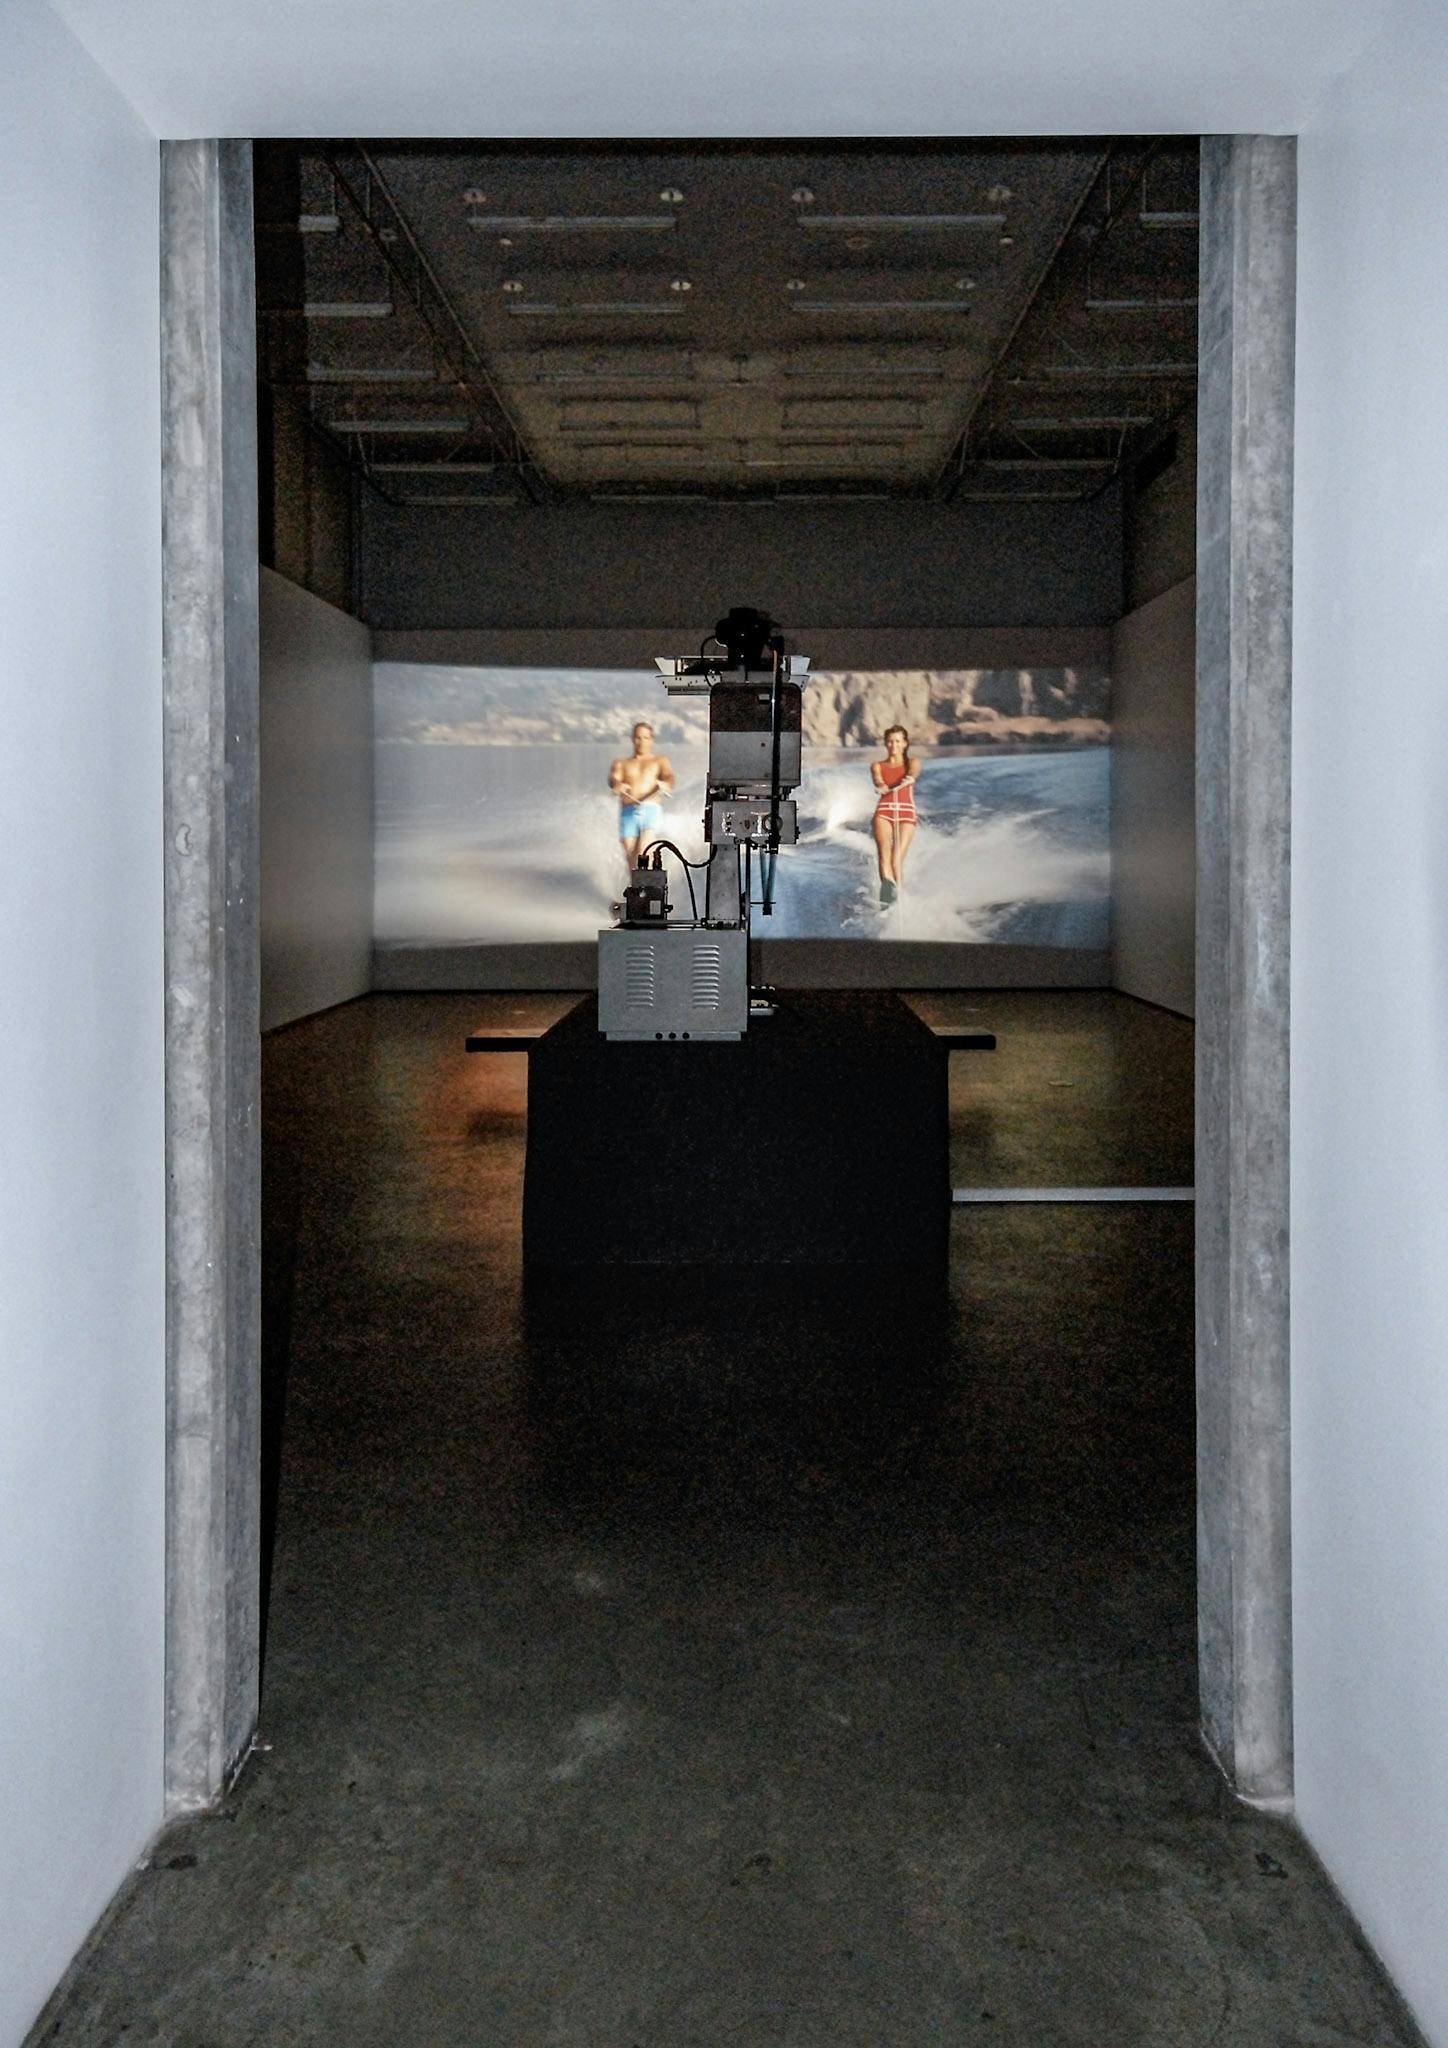 A film is projected on the wall in a gallery. The film depicts a man and woman wakeboarding. A film projector placed on the floor close to the gallery entrance projects this film to the wall. 